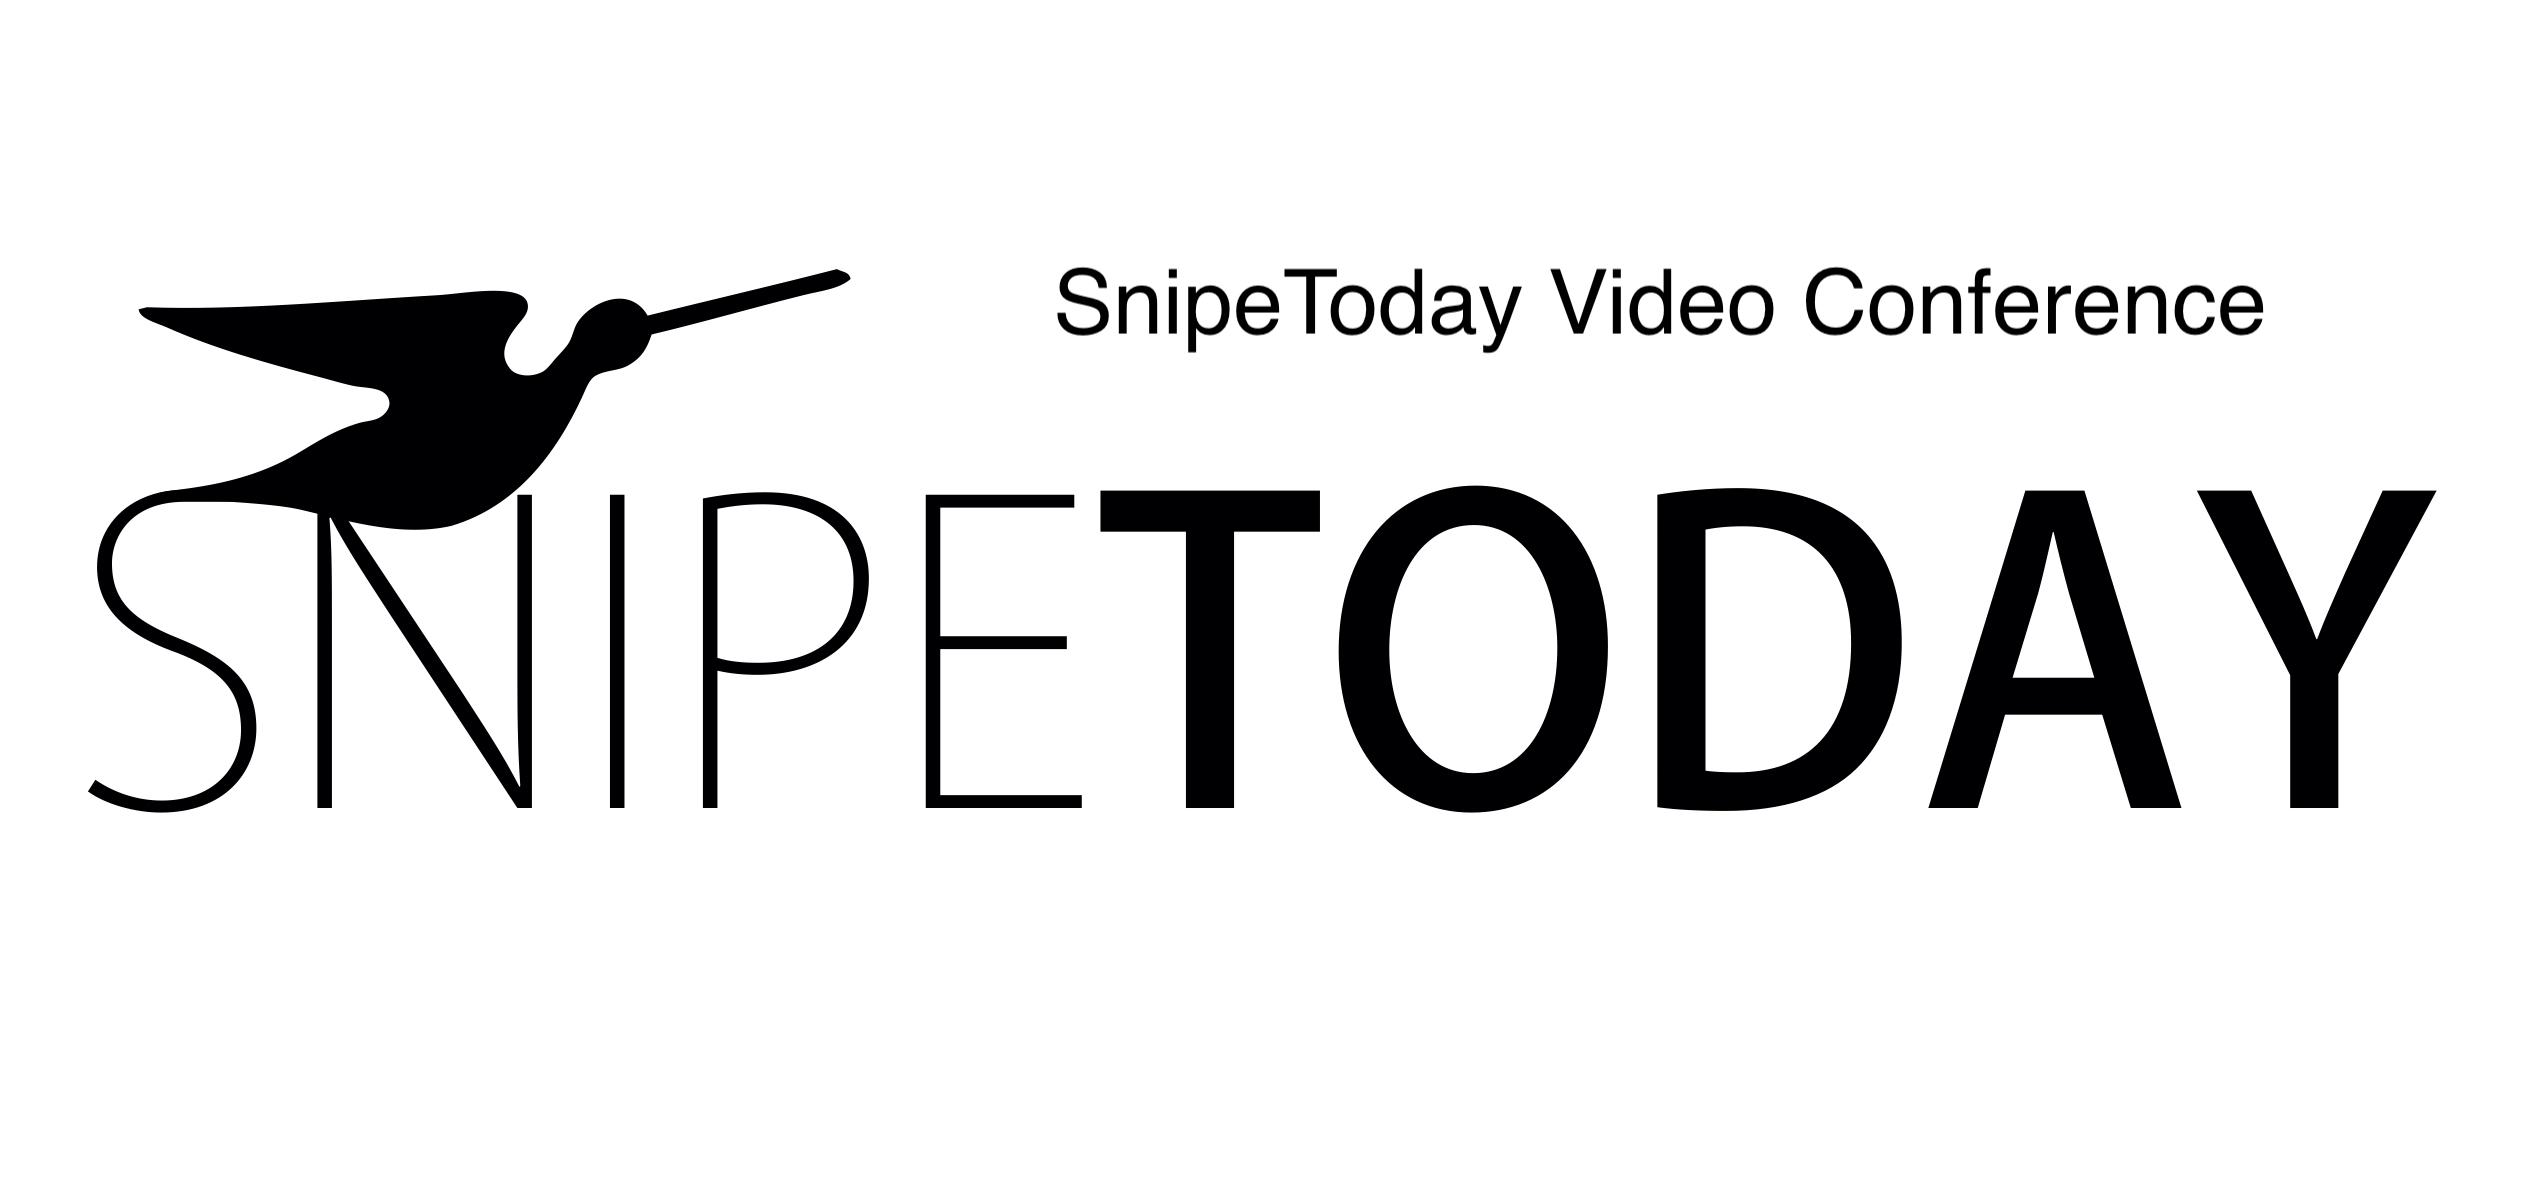 SnipeToday Video Conference: 2020 Snipe Open European Championship Image